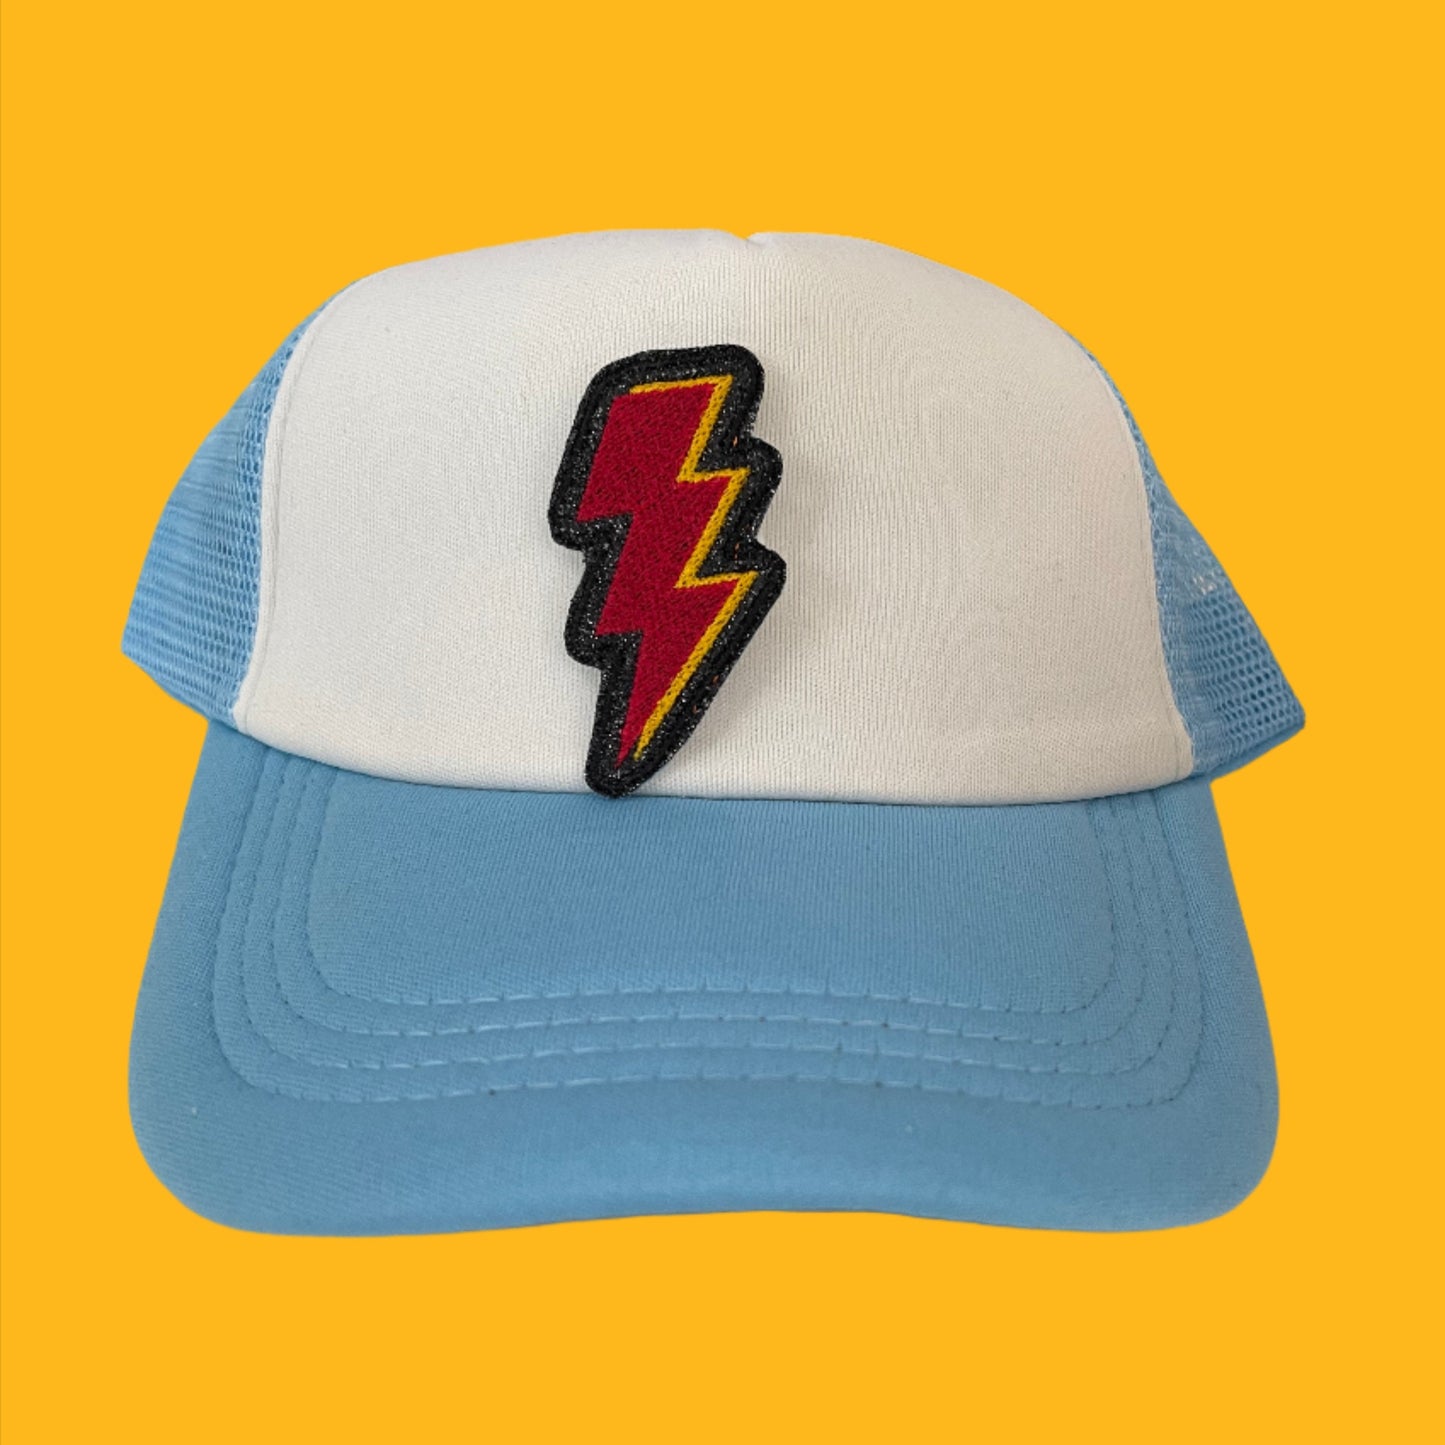 Close-up of a Kansas City Chiefs Lightning Bolt embroidered patch featuring the iconic red and yellow colors, perfect for customizing hats, apparel, and various accessories.